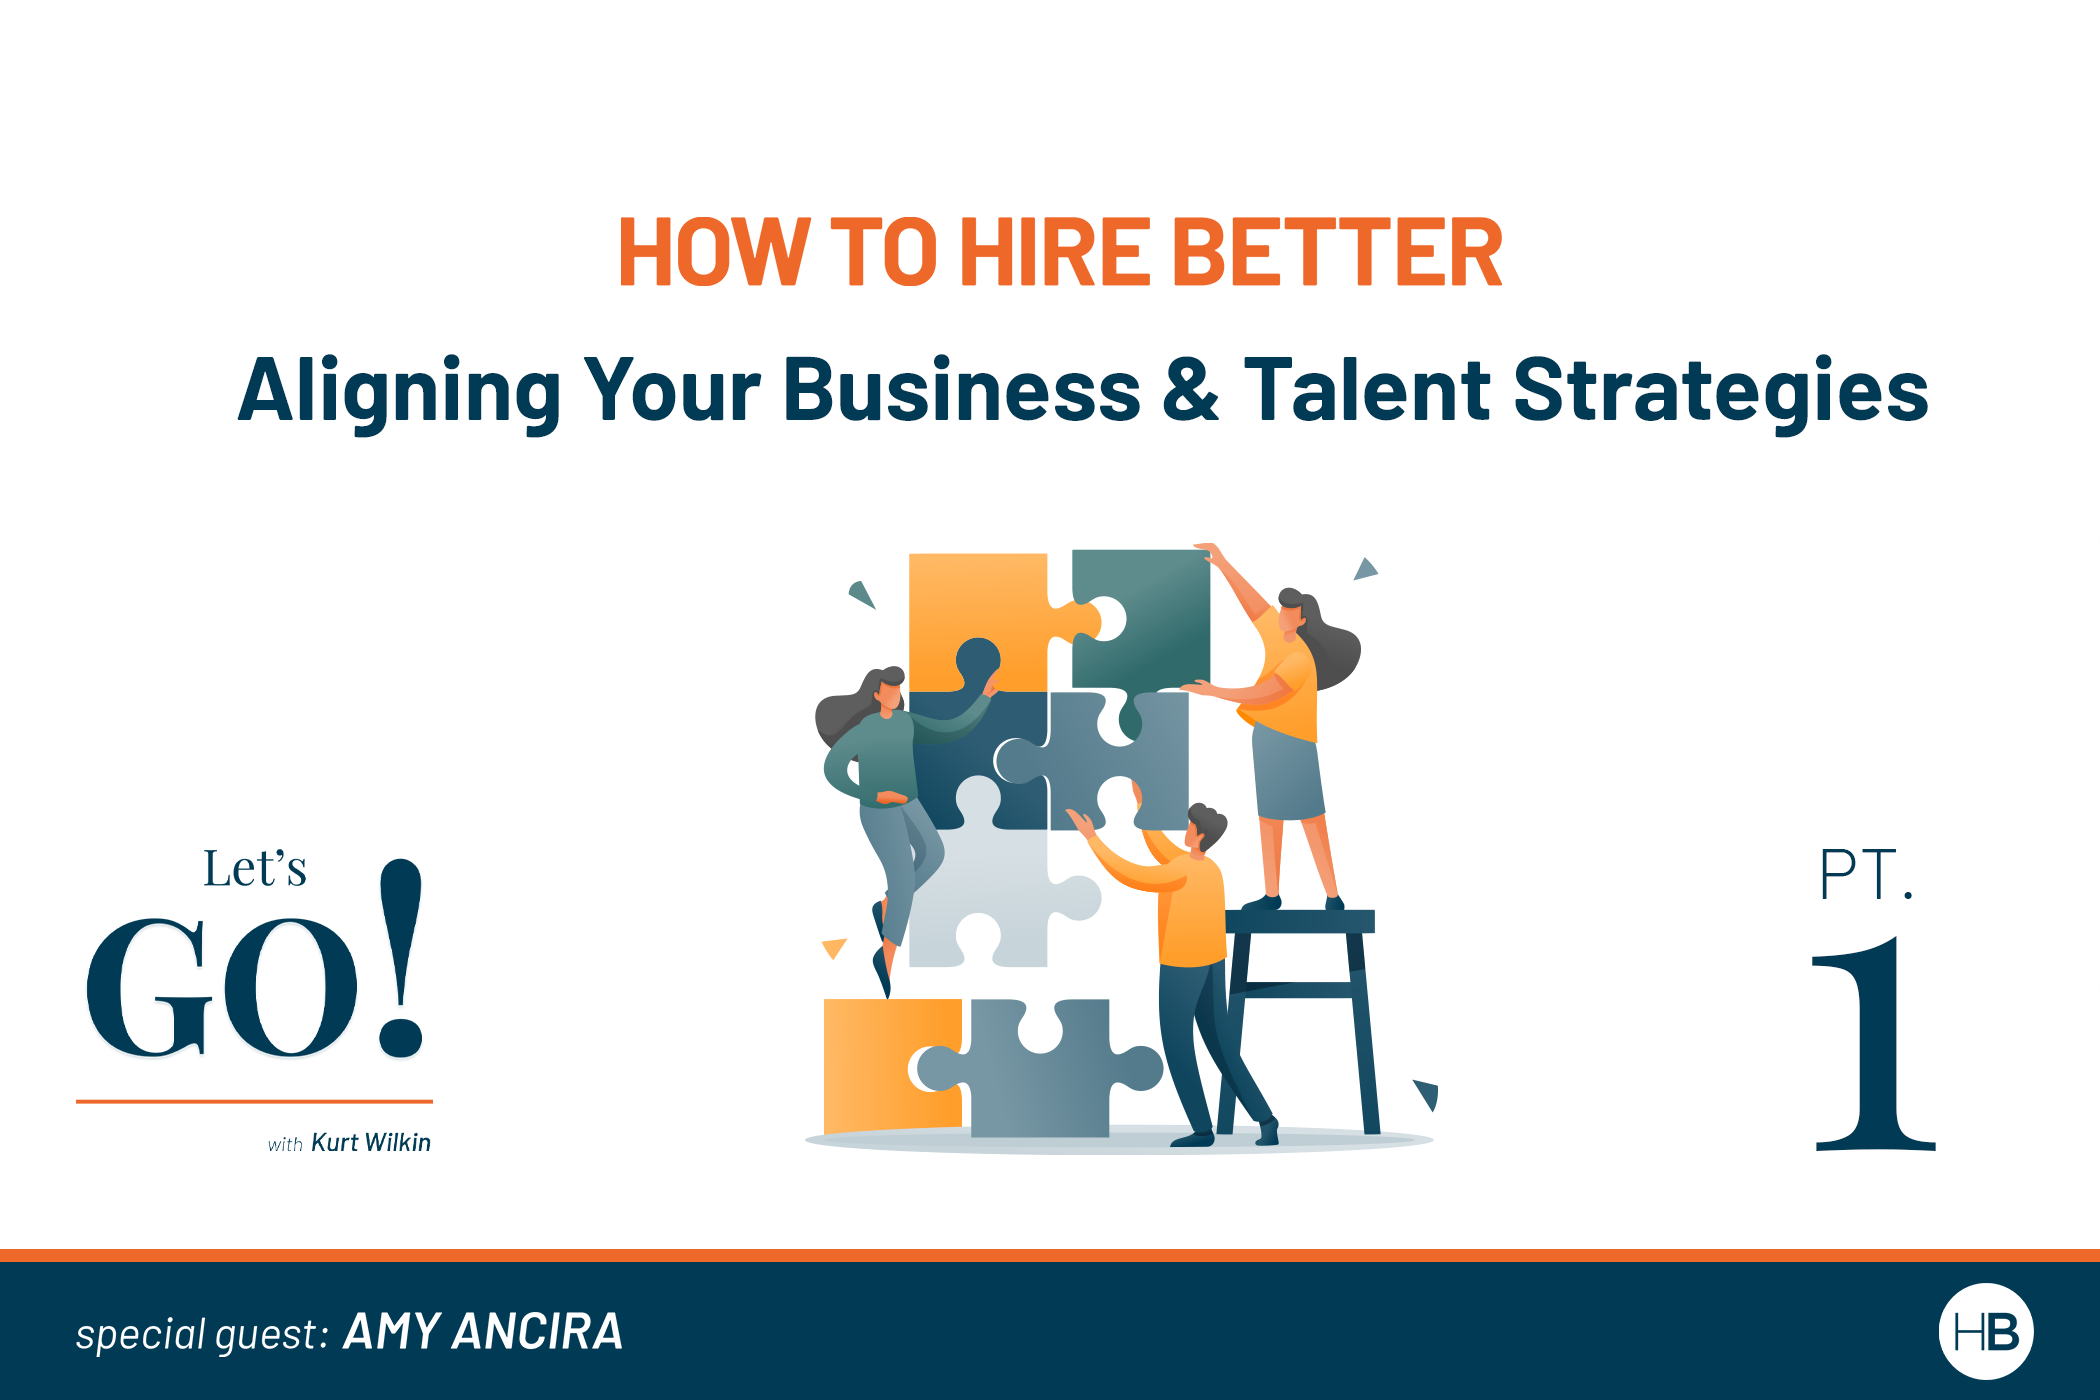 How to Hire Better: Aligning Your Business & Talent Strategies